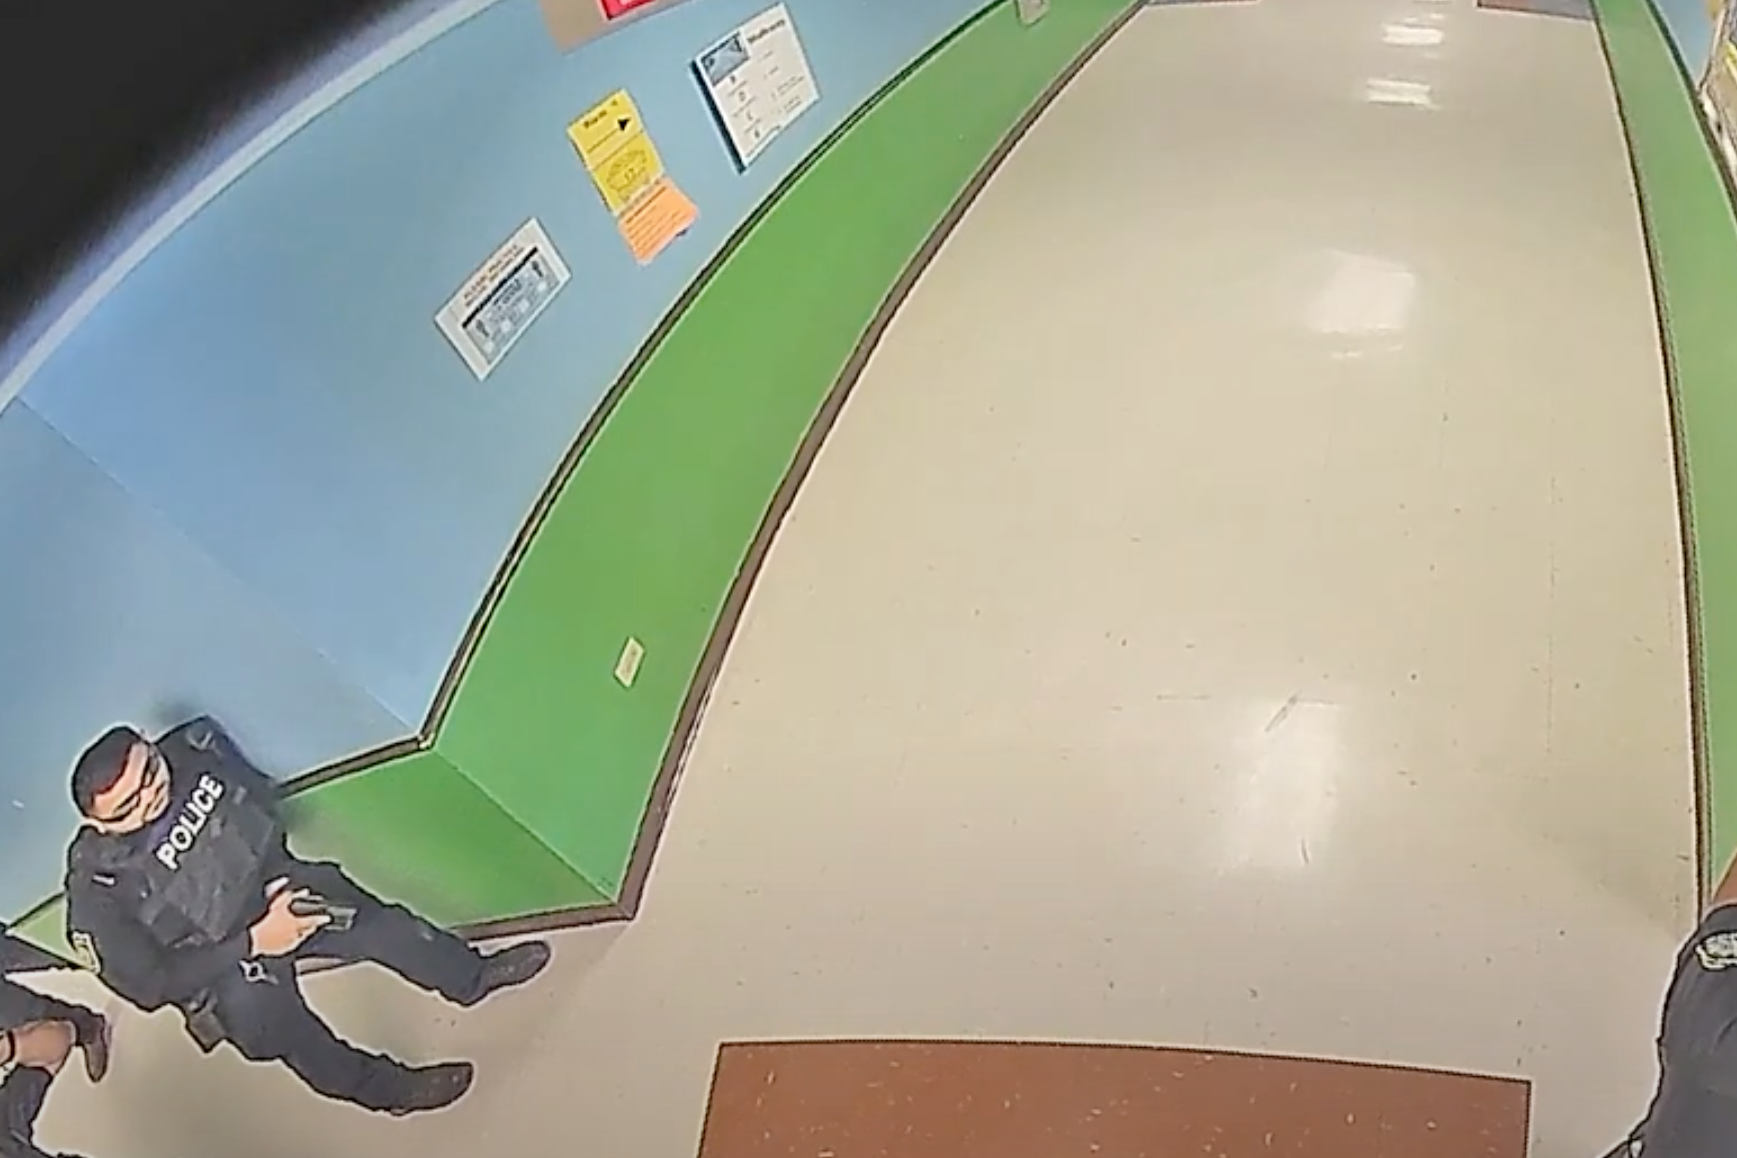 Footage from the video obtained by the Austin American-Statesman and KVUE. An officer stands with a gun pointed down a hallway of an Elementary School.